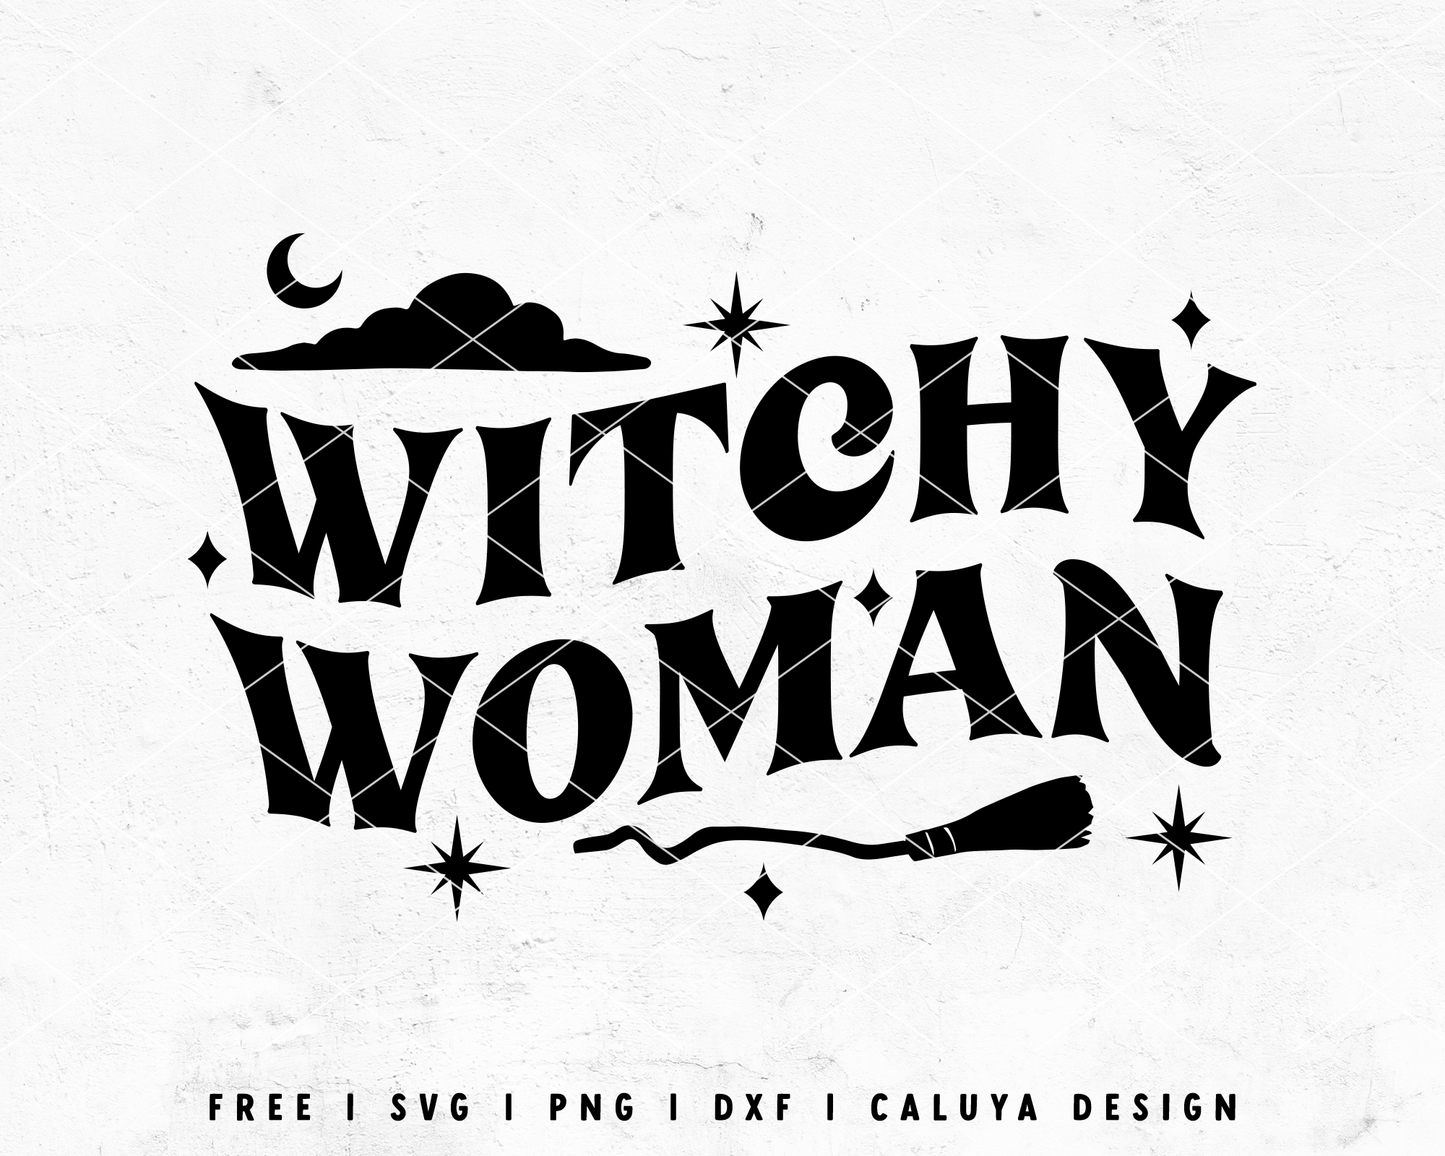 Wiccan SVG, Wicca SVG, Witchy SVG Graphic by Cnxsvg · Creative Fabrica